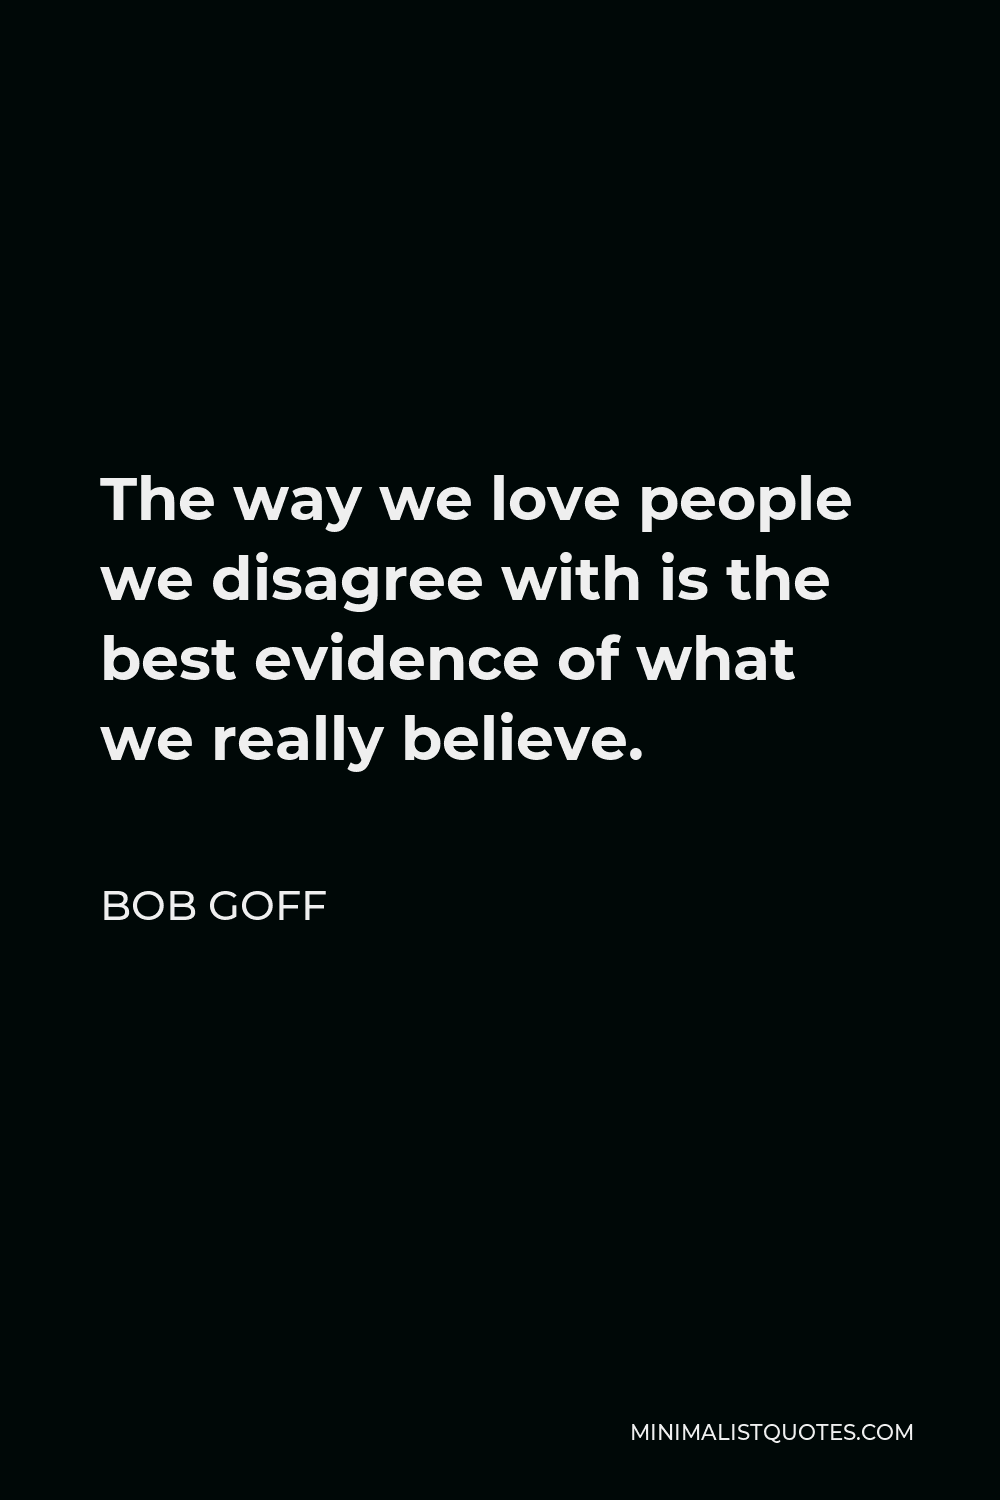 Bob Goff Quote - The way we love people we disagree with is the best evidence of what we really believe.